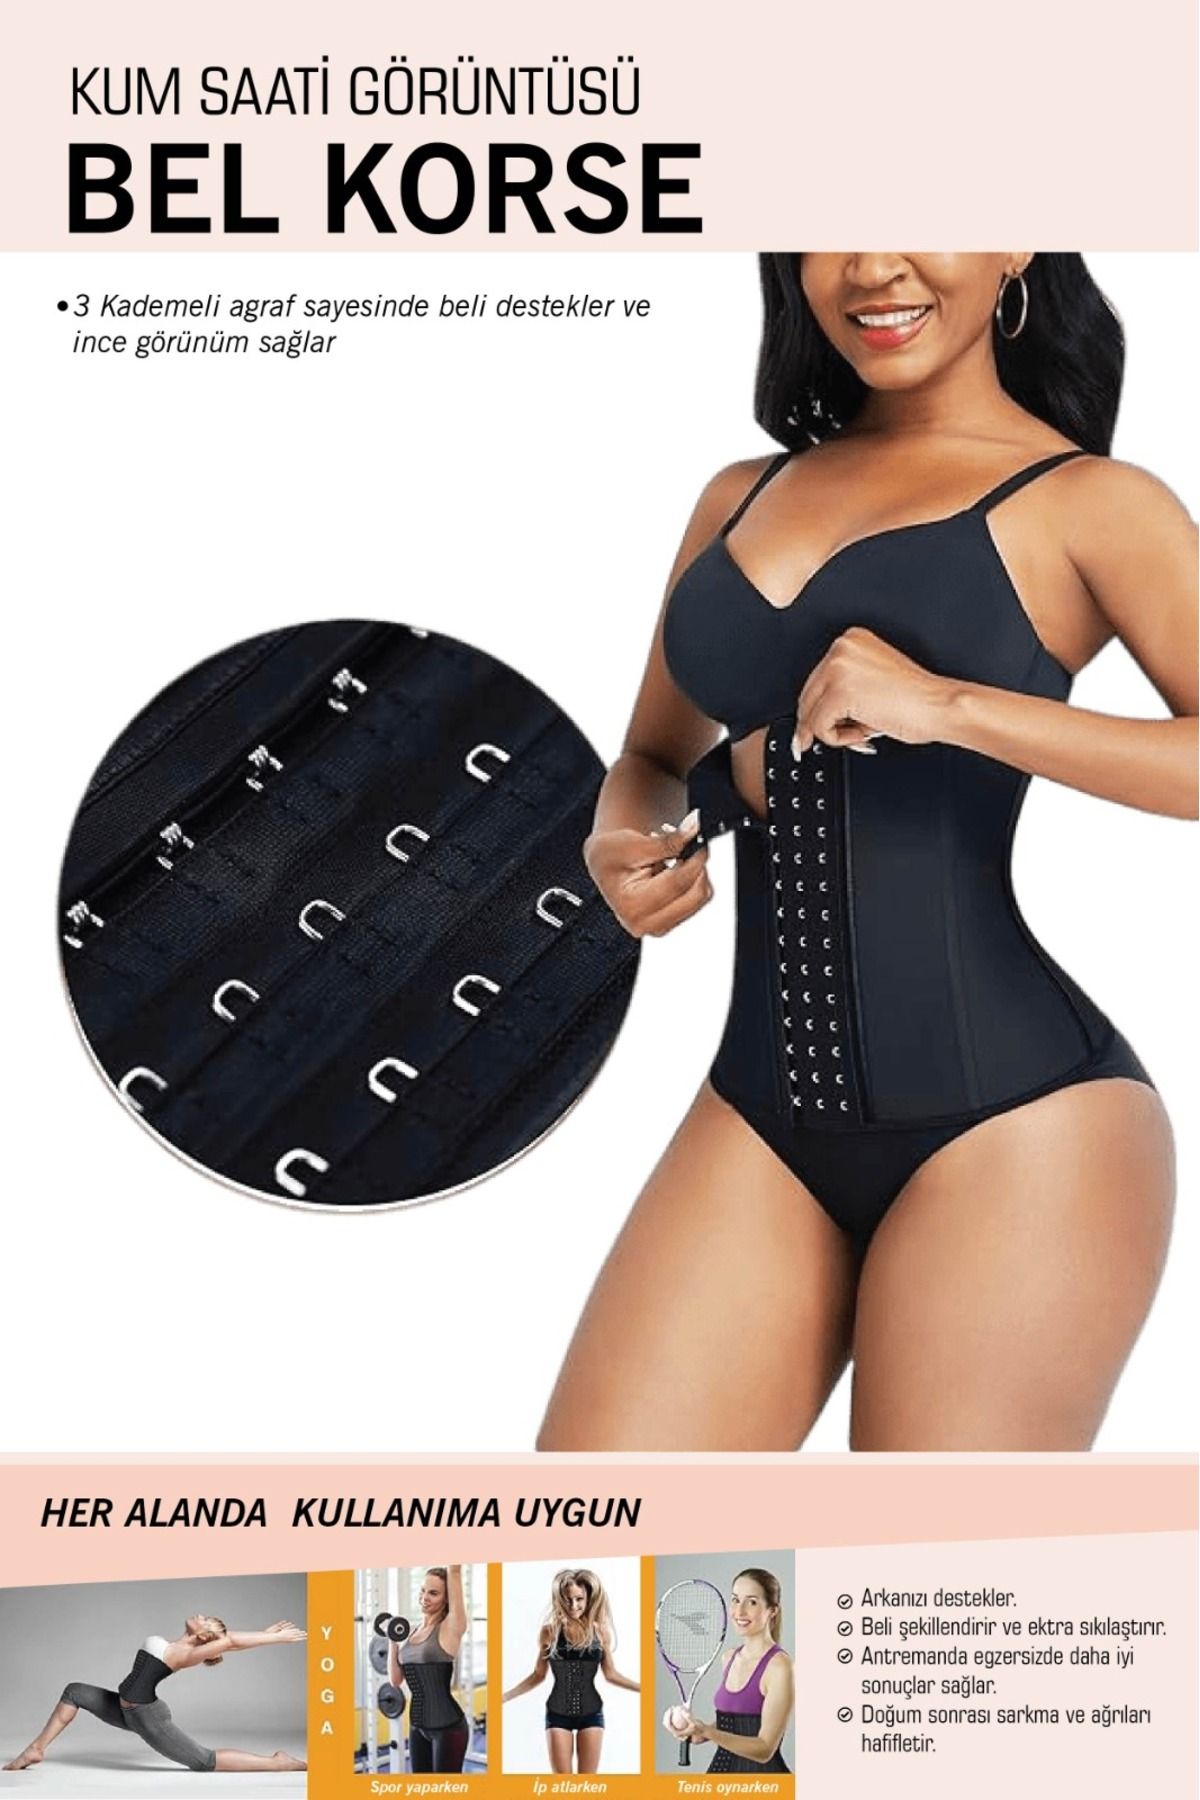 SAUNA SUIT Latex Waist Corset Slimming Firming Hourglass Appearance Wrapped  Waist Corset - Trendyol